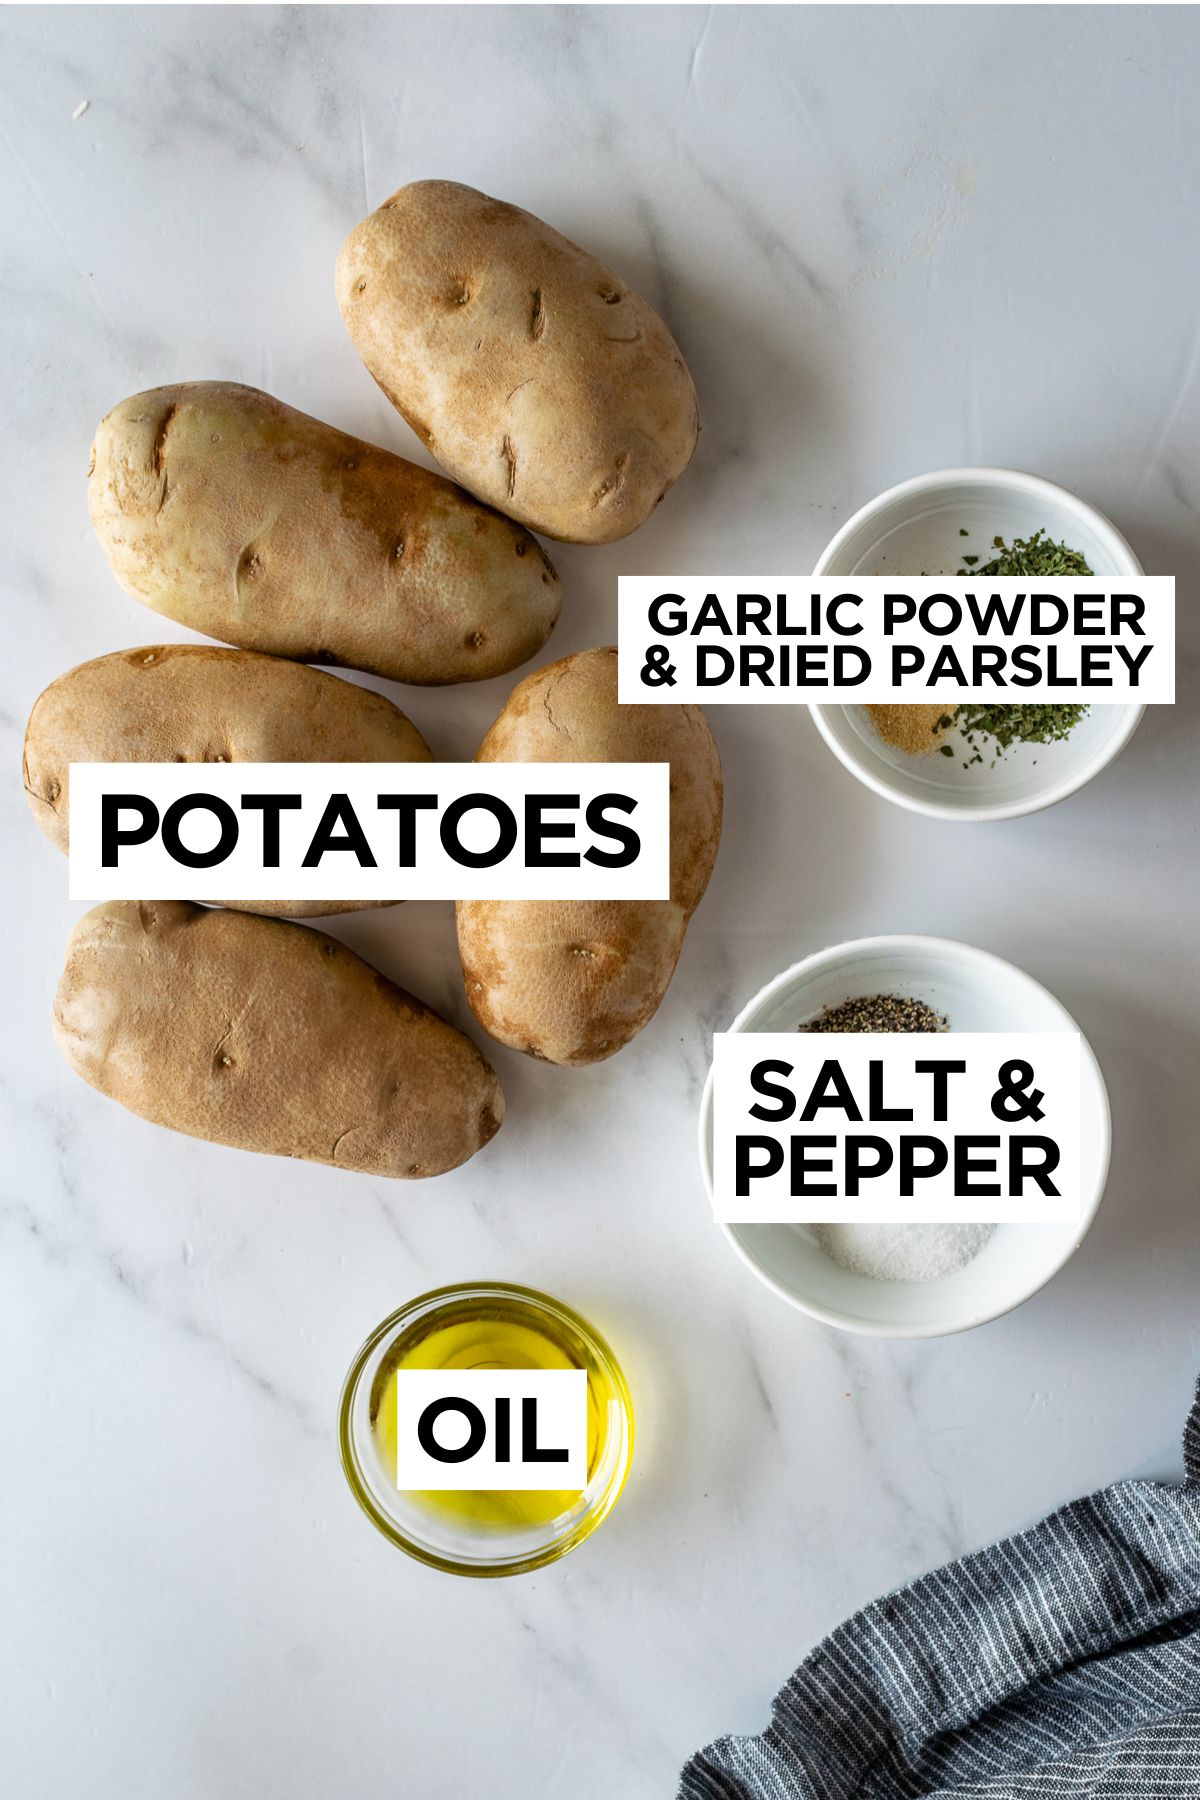 ingredients for baked french fries such as potatoes, garlic powder, dried parsley, salt, pepper and olive oil.